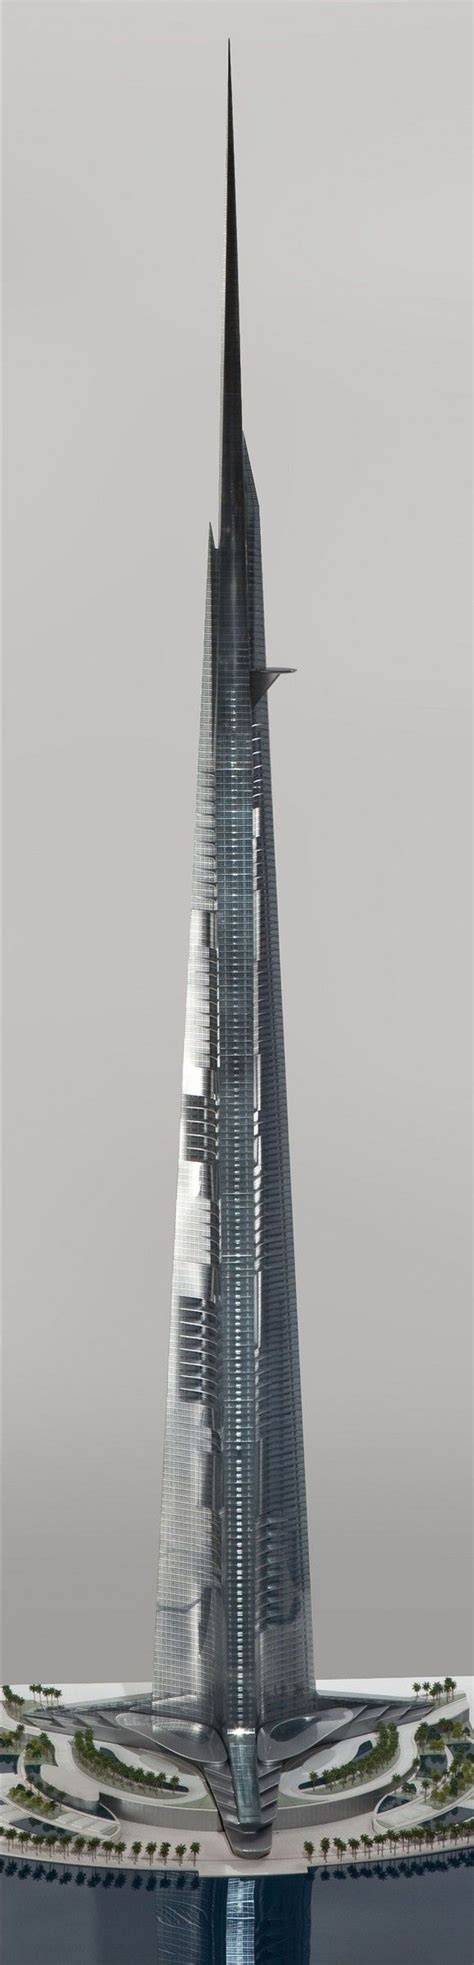 Jeddah Tower The Worlds Tallest Skyscraper Is On Hold Structure